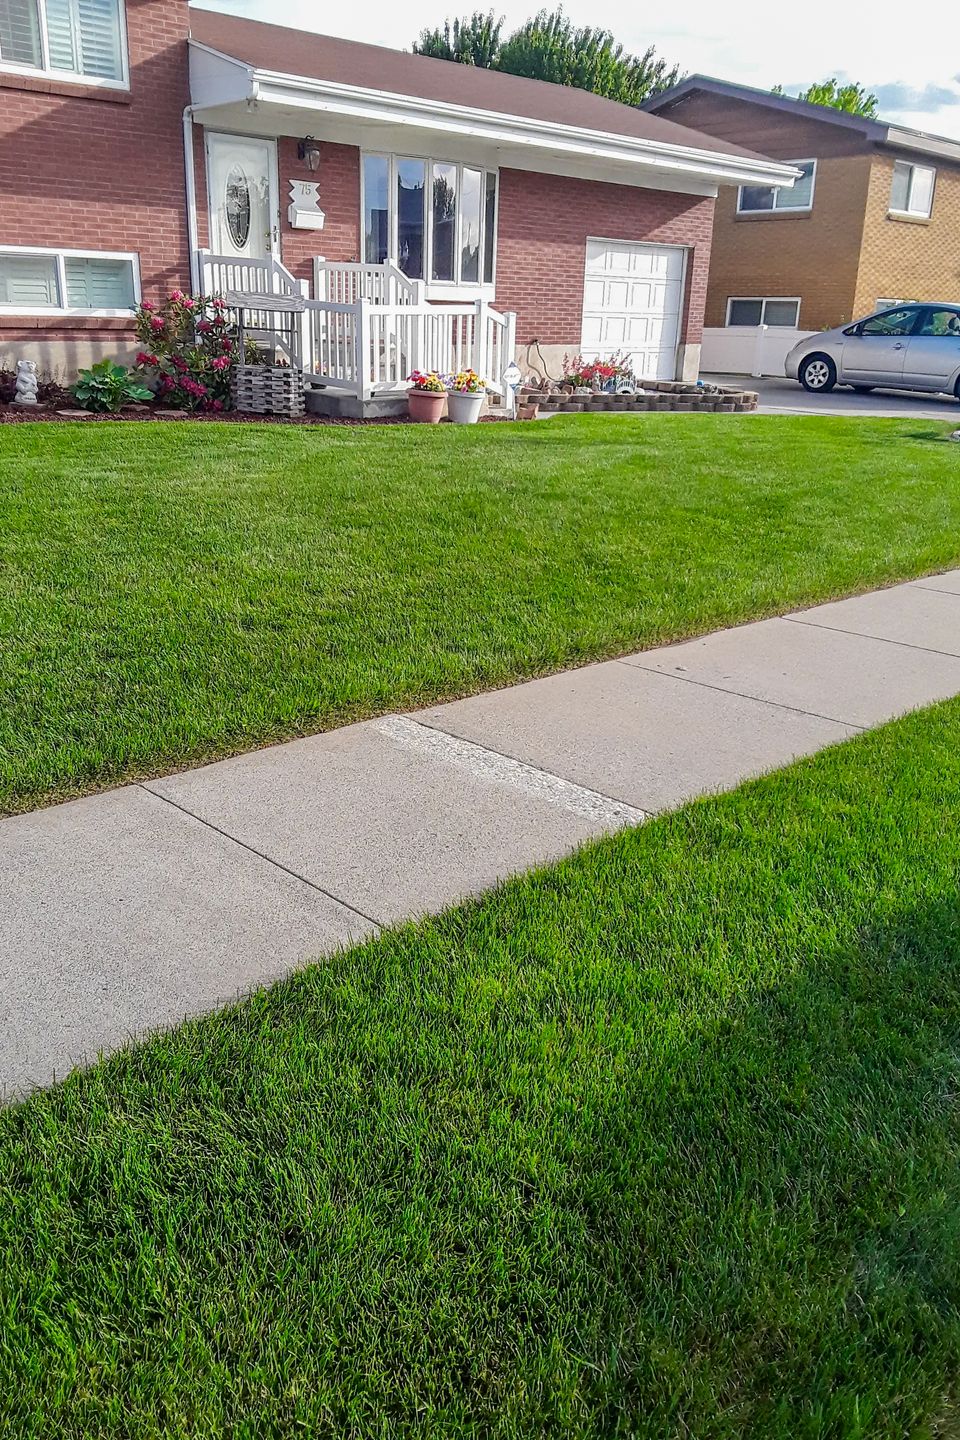 Professionaly cared for lawn in salt lake city ut